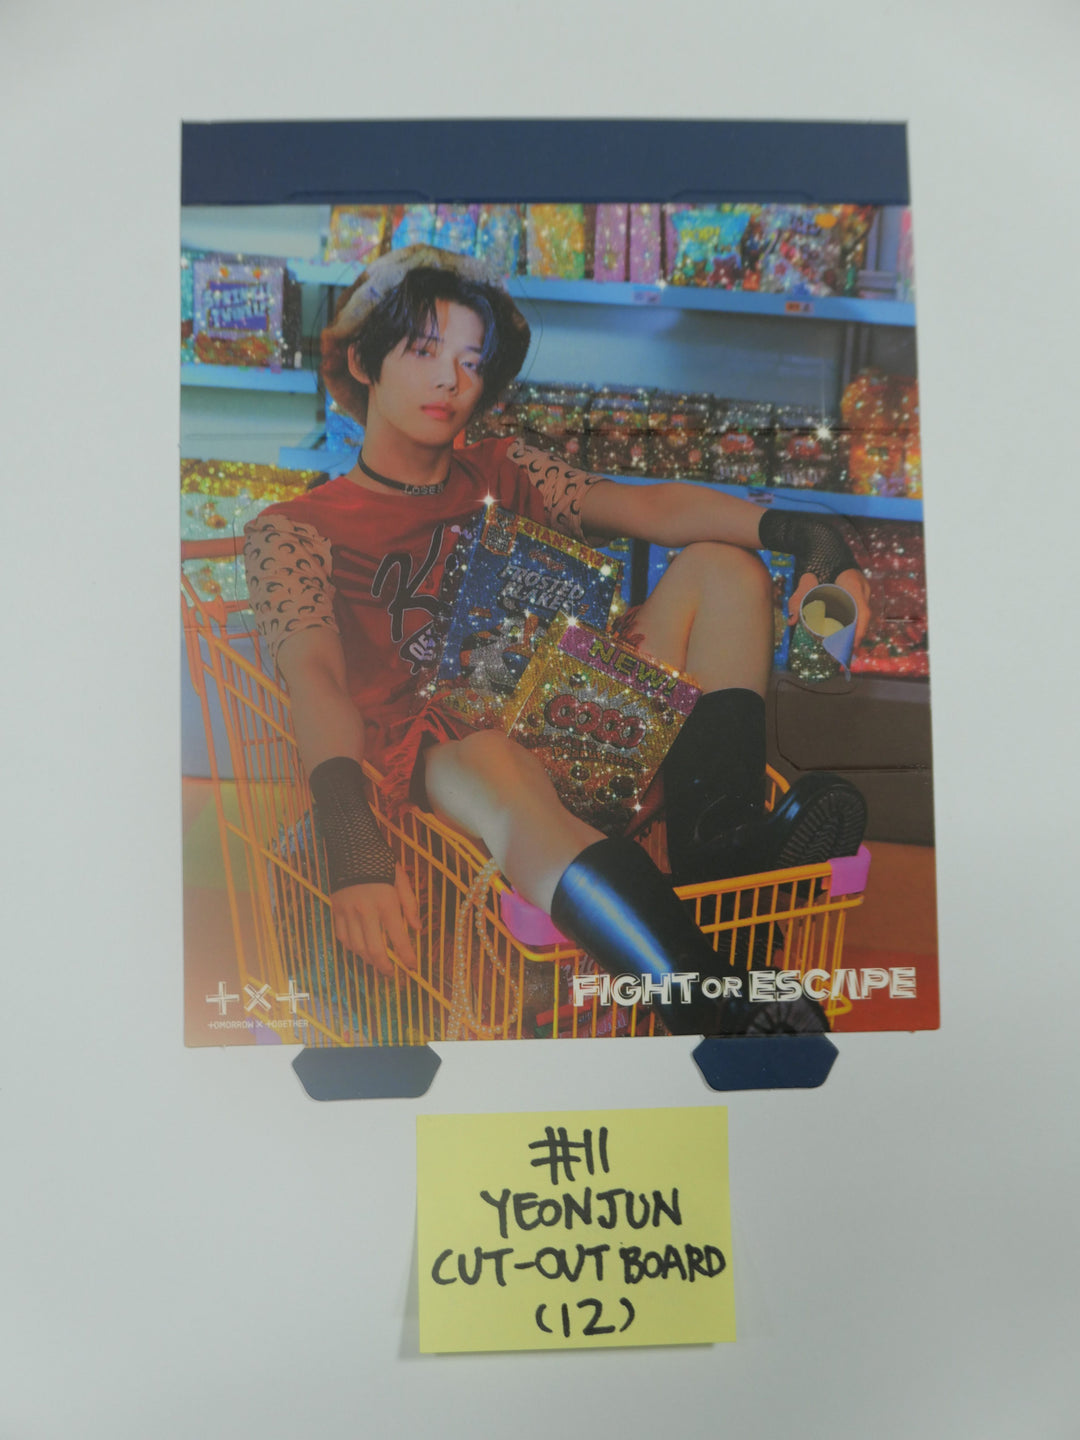 TXT 'Fight Of Escape' - Official Postcard, AR Card & Cut-Out Board